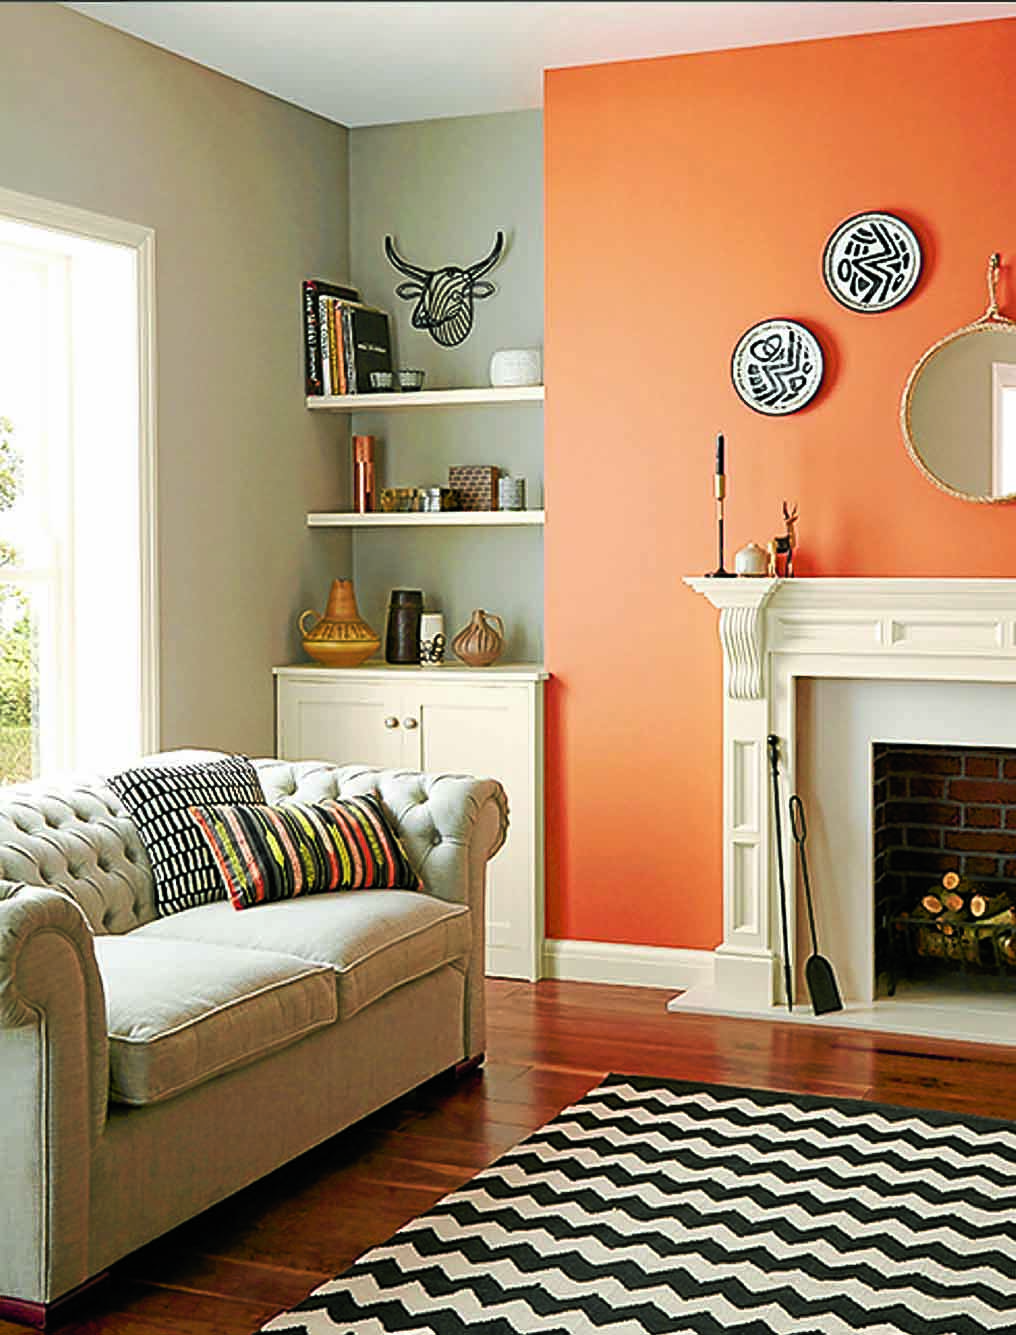 Colour psychology is key to home heaven